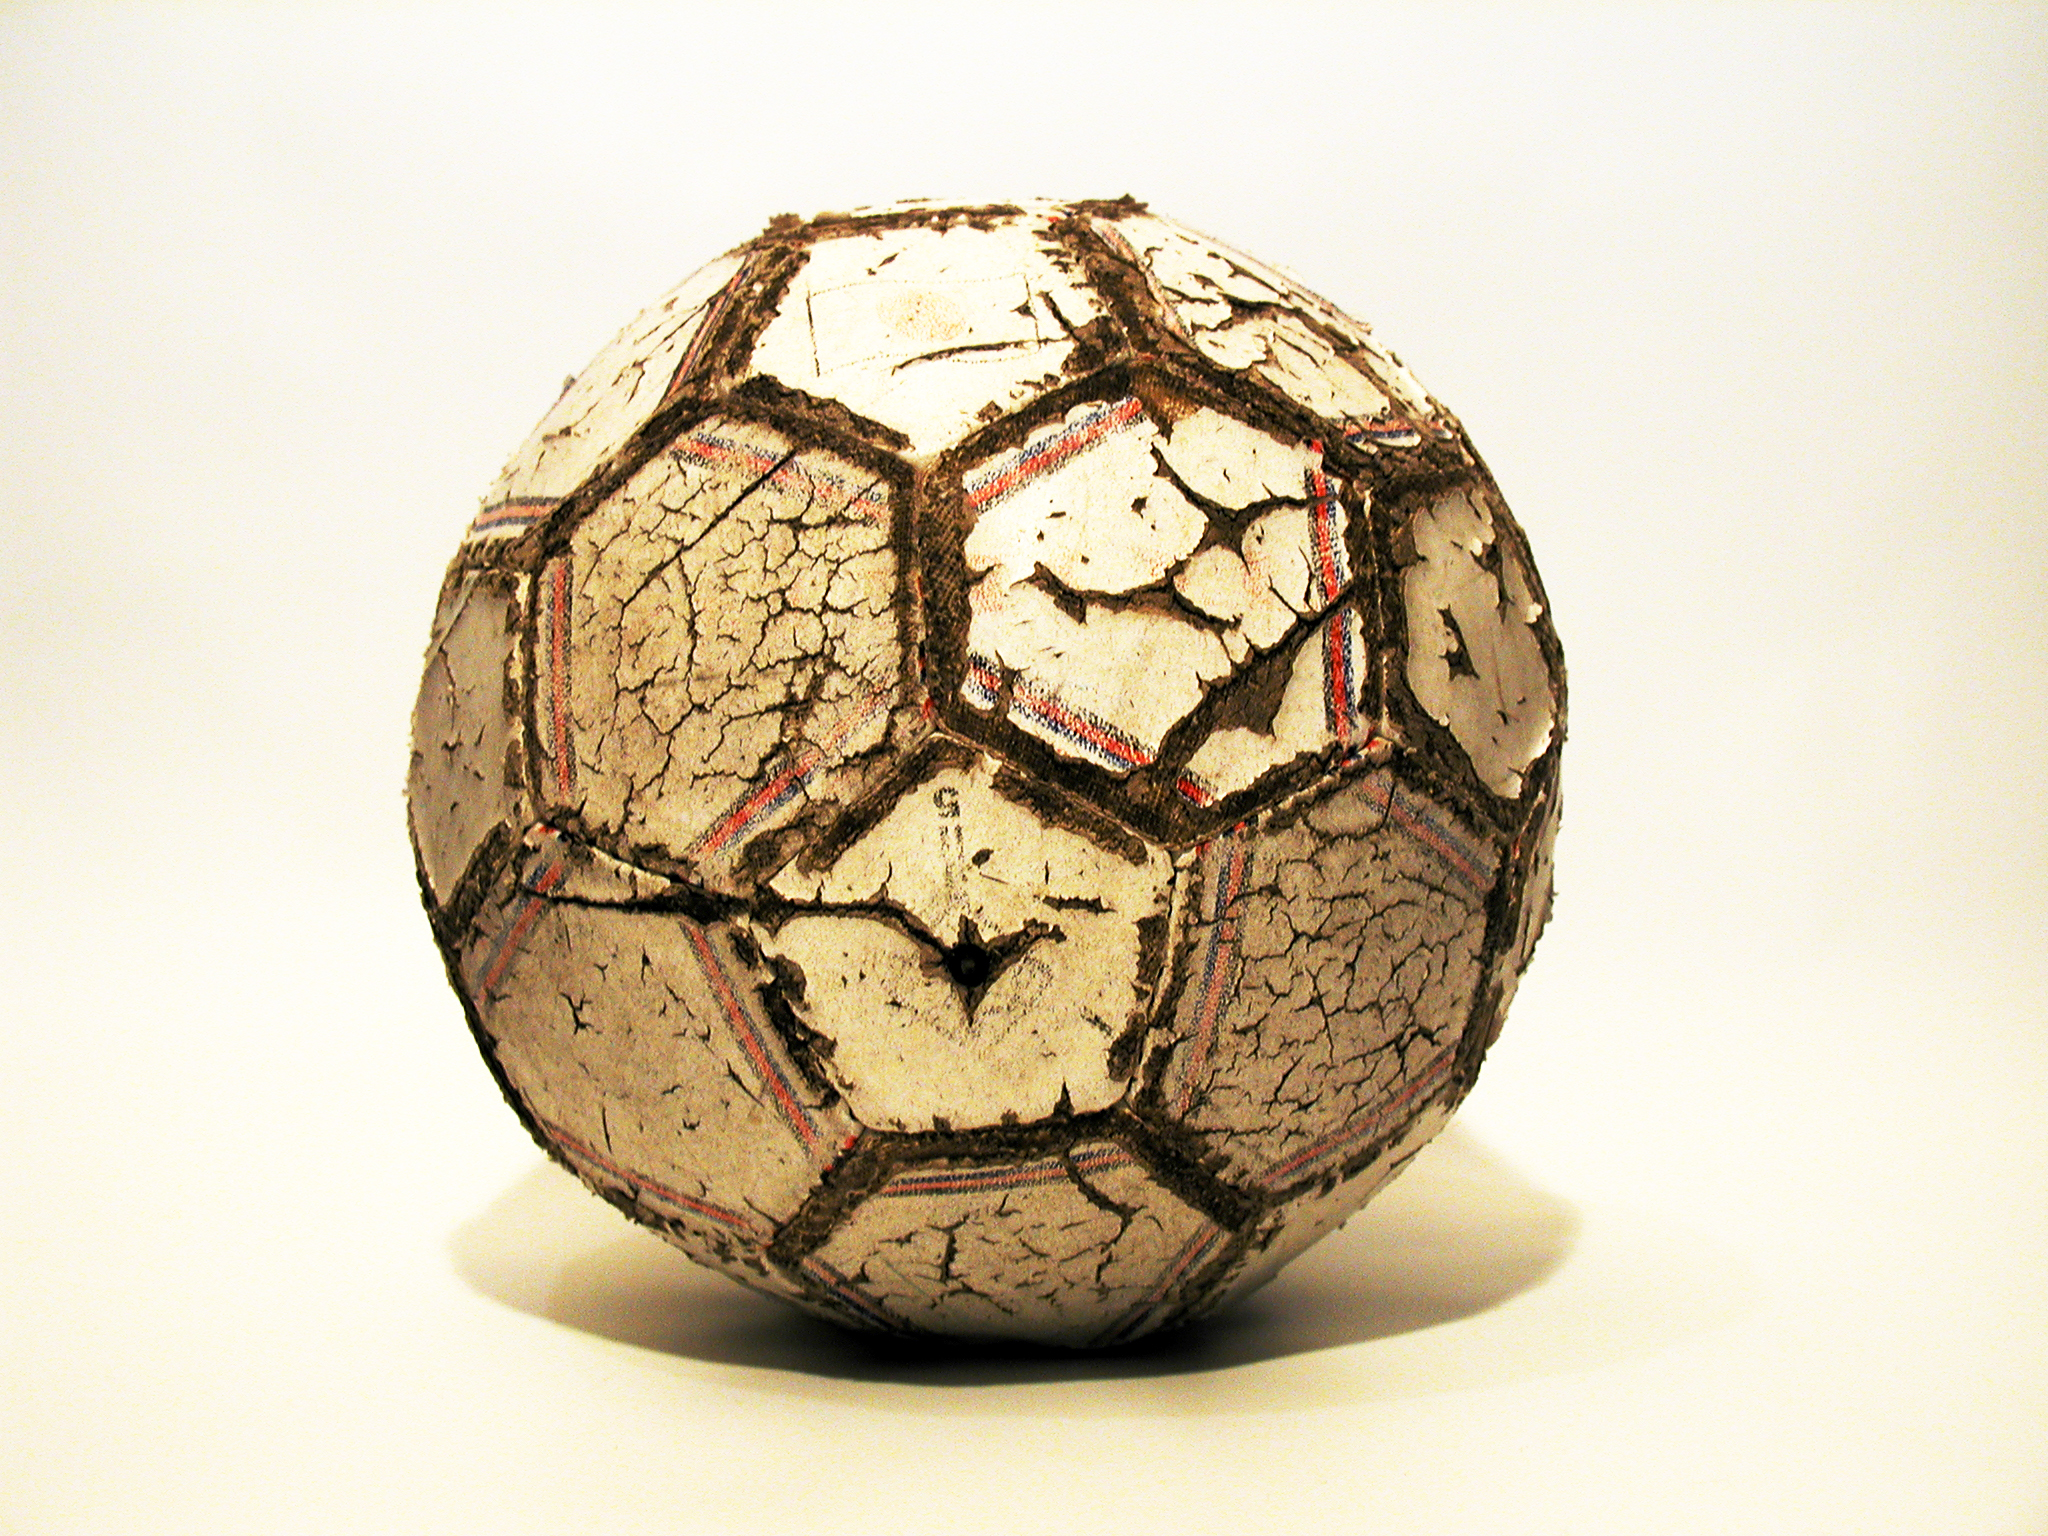 An old and well-worn football